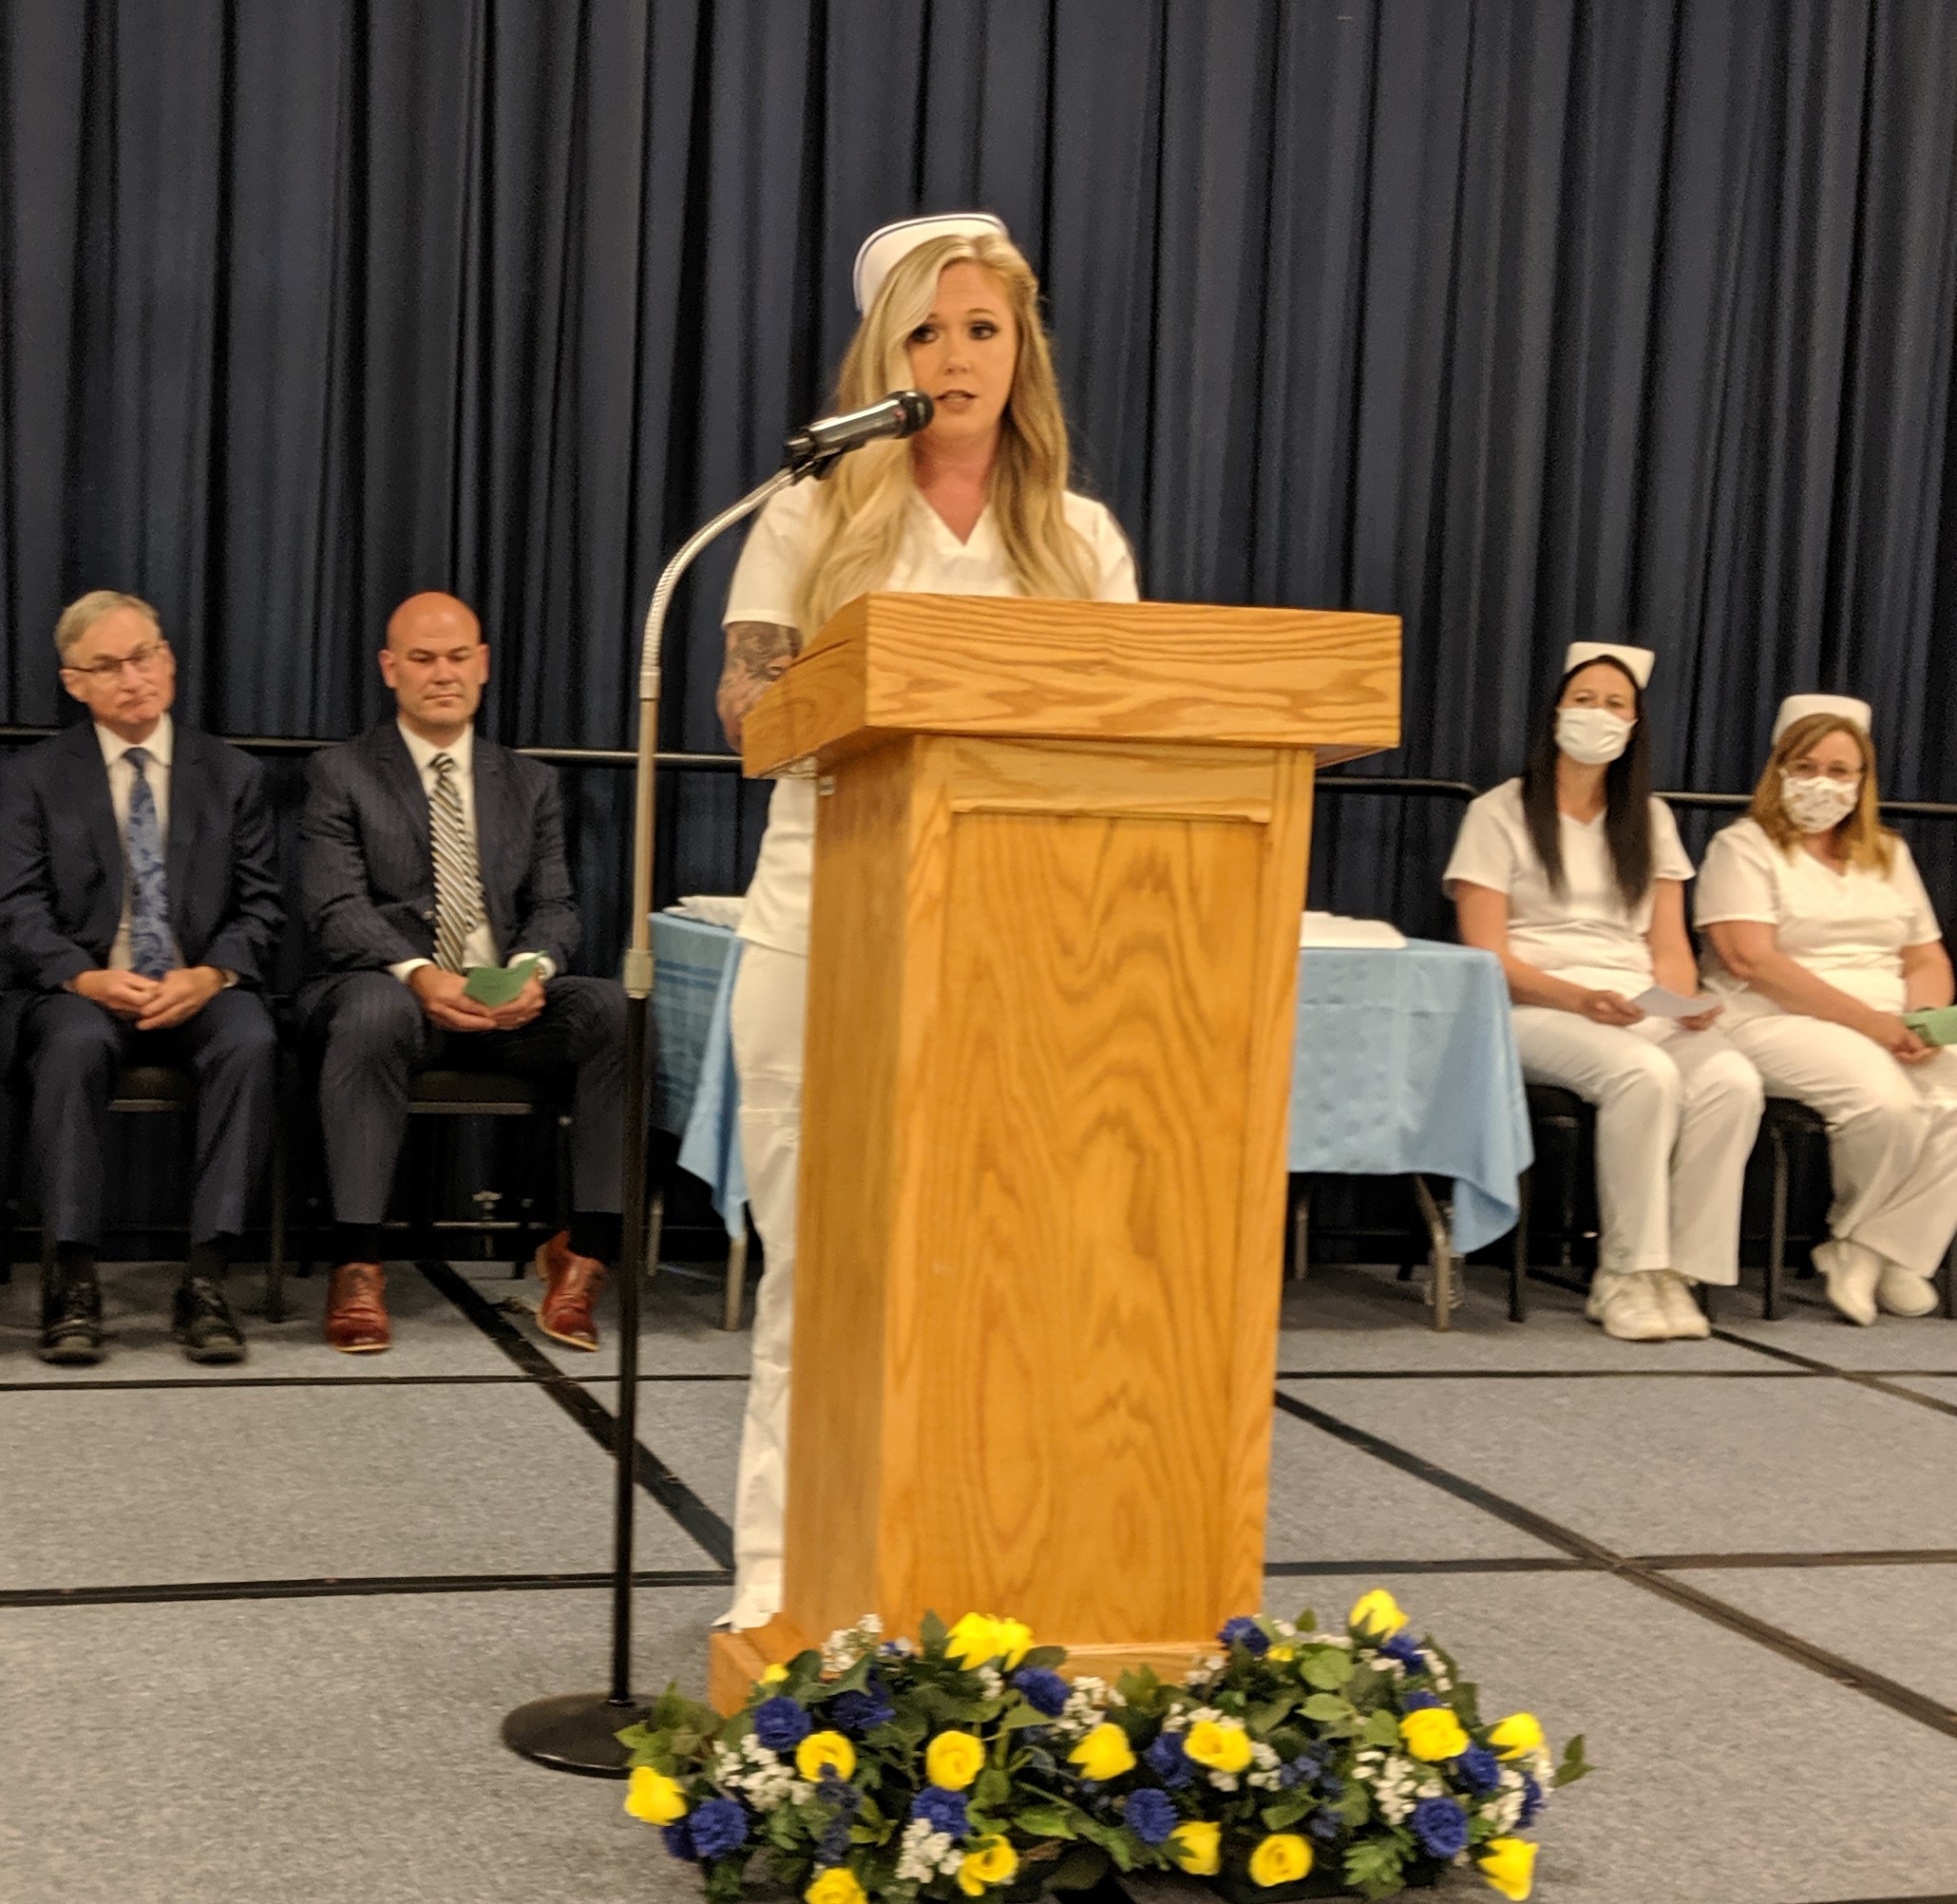 Knoedler School of Practical Nursing Honor Graduate Kodi Carl addressed the crowd during the graduation ceremony August 10th at A-Tech